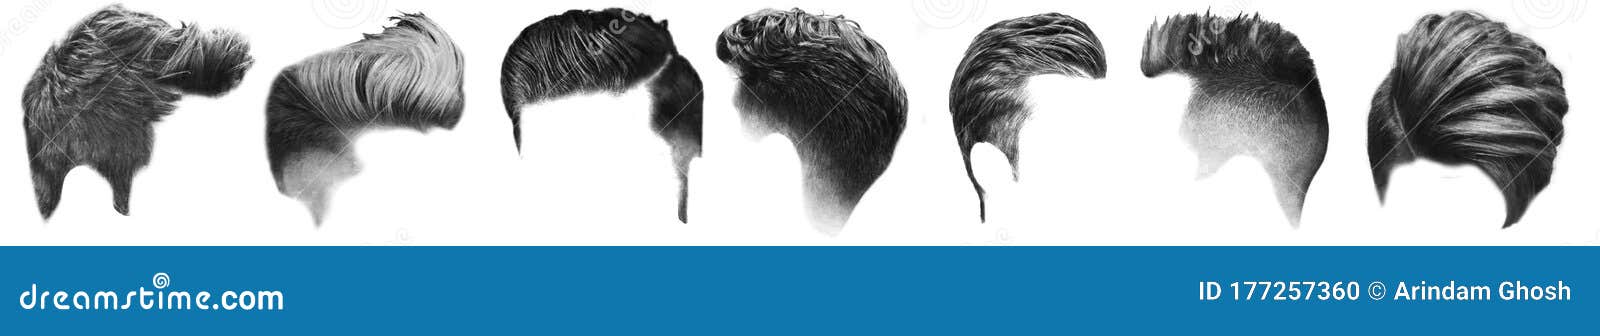 Collage of Different Men`s Hair Style Color Mockup Illustration for Beauty  and Styling Concept Product. Black Colored Stock Illustration -  Illustration of mockup, hairstyle: 177257360